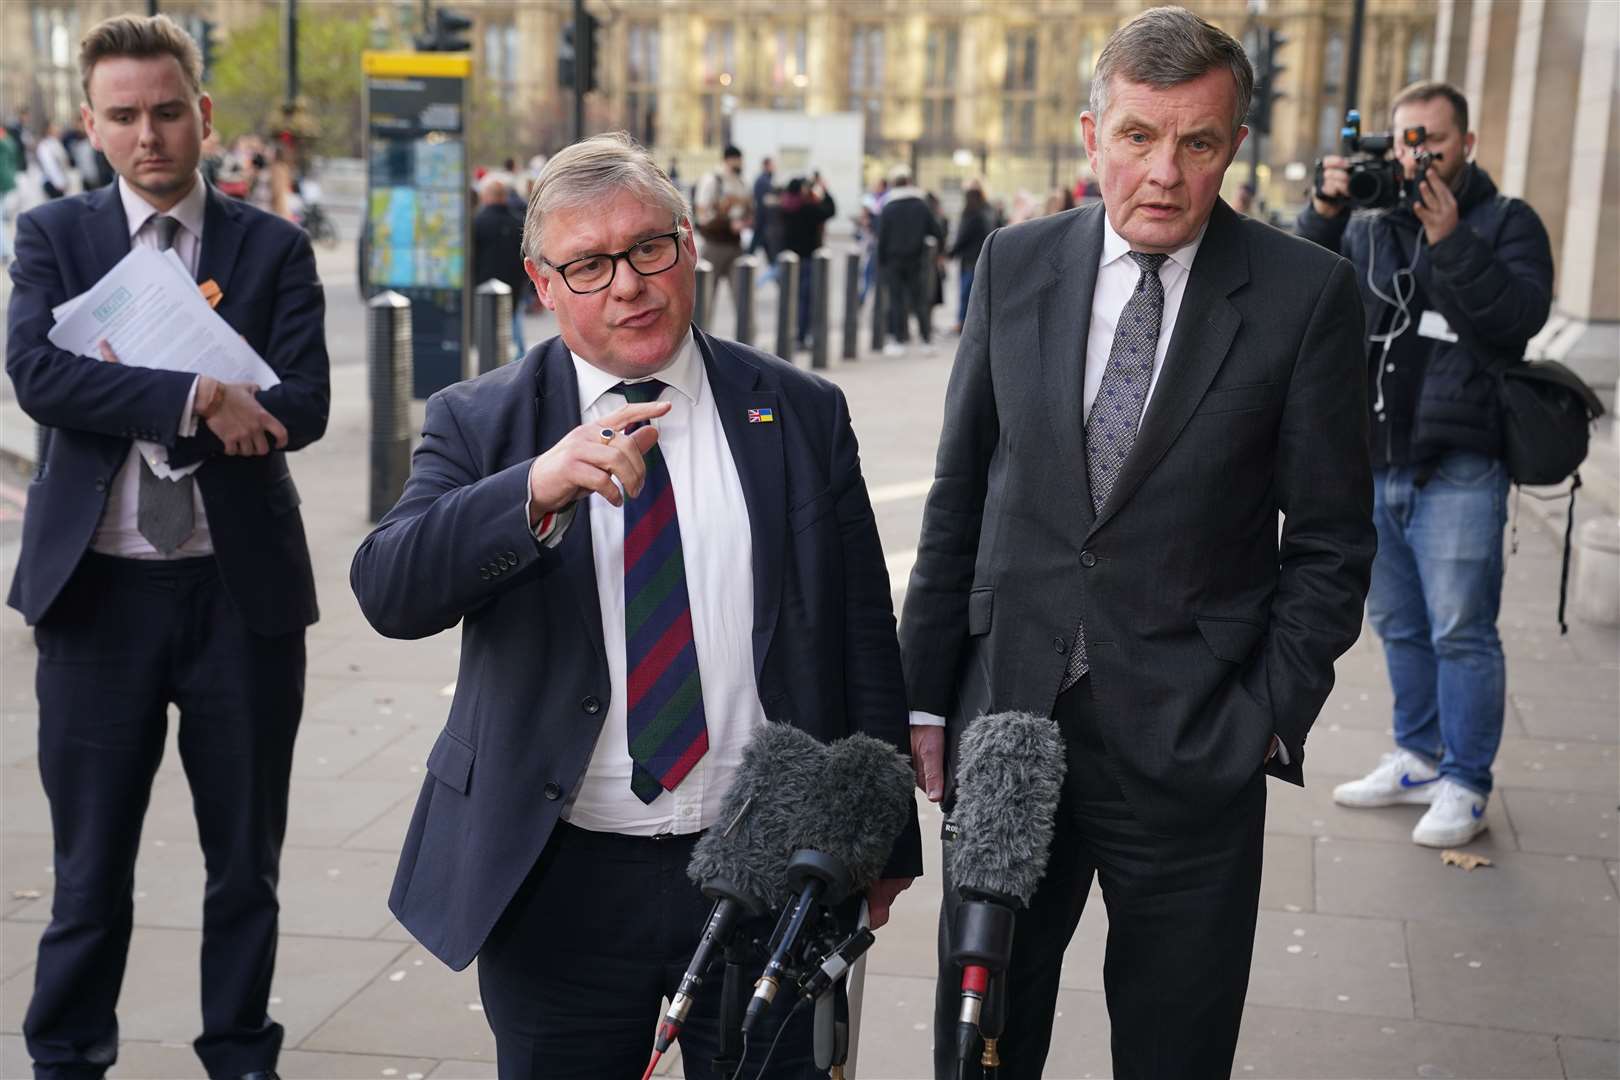 European Research Group chair Mark Francois (left) and deputy chair David Jones (Lucy North/PA)